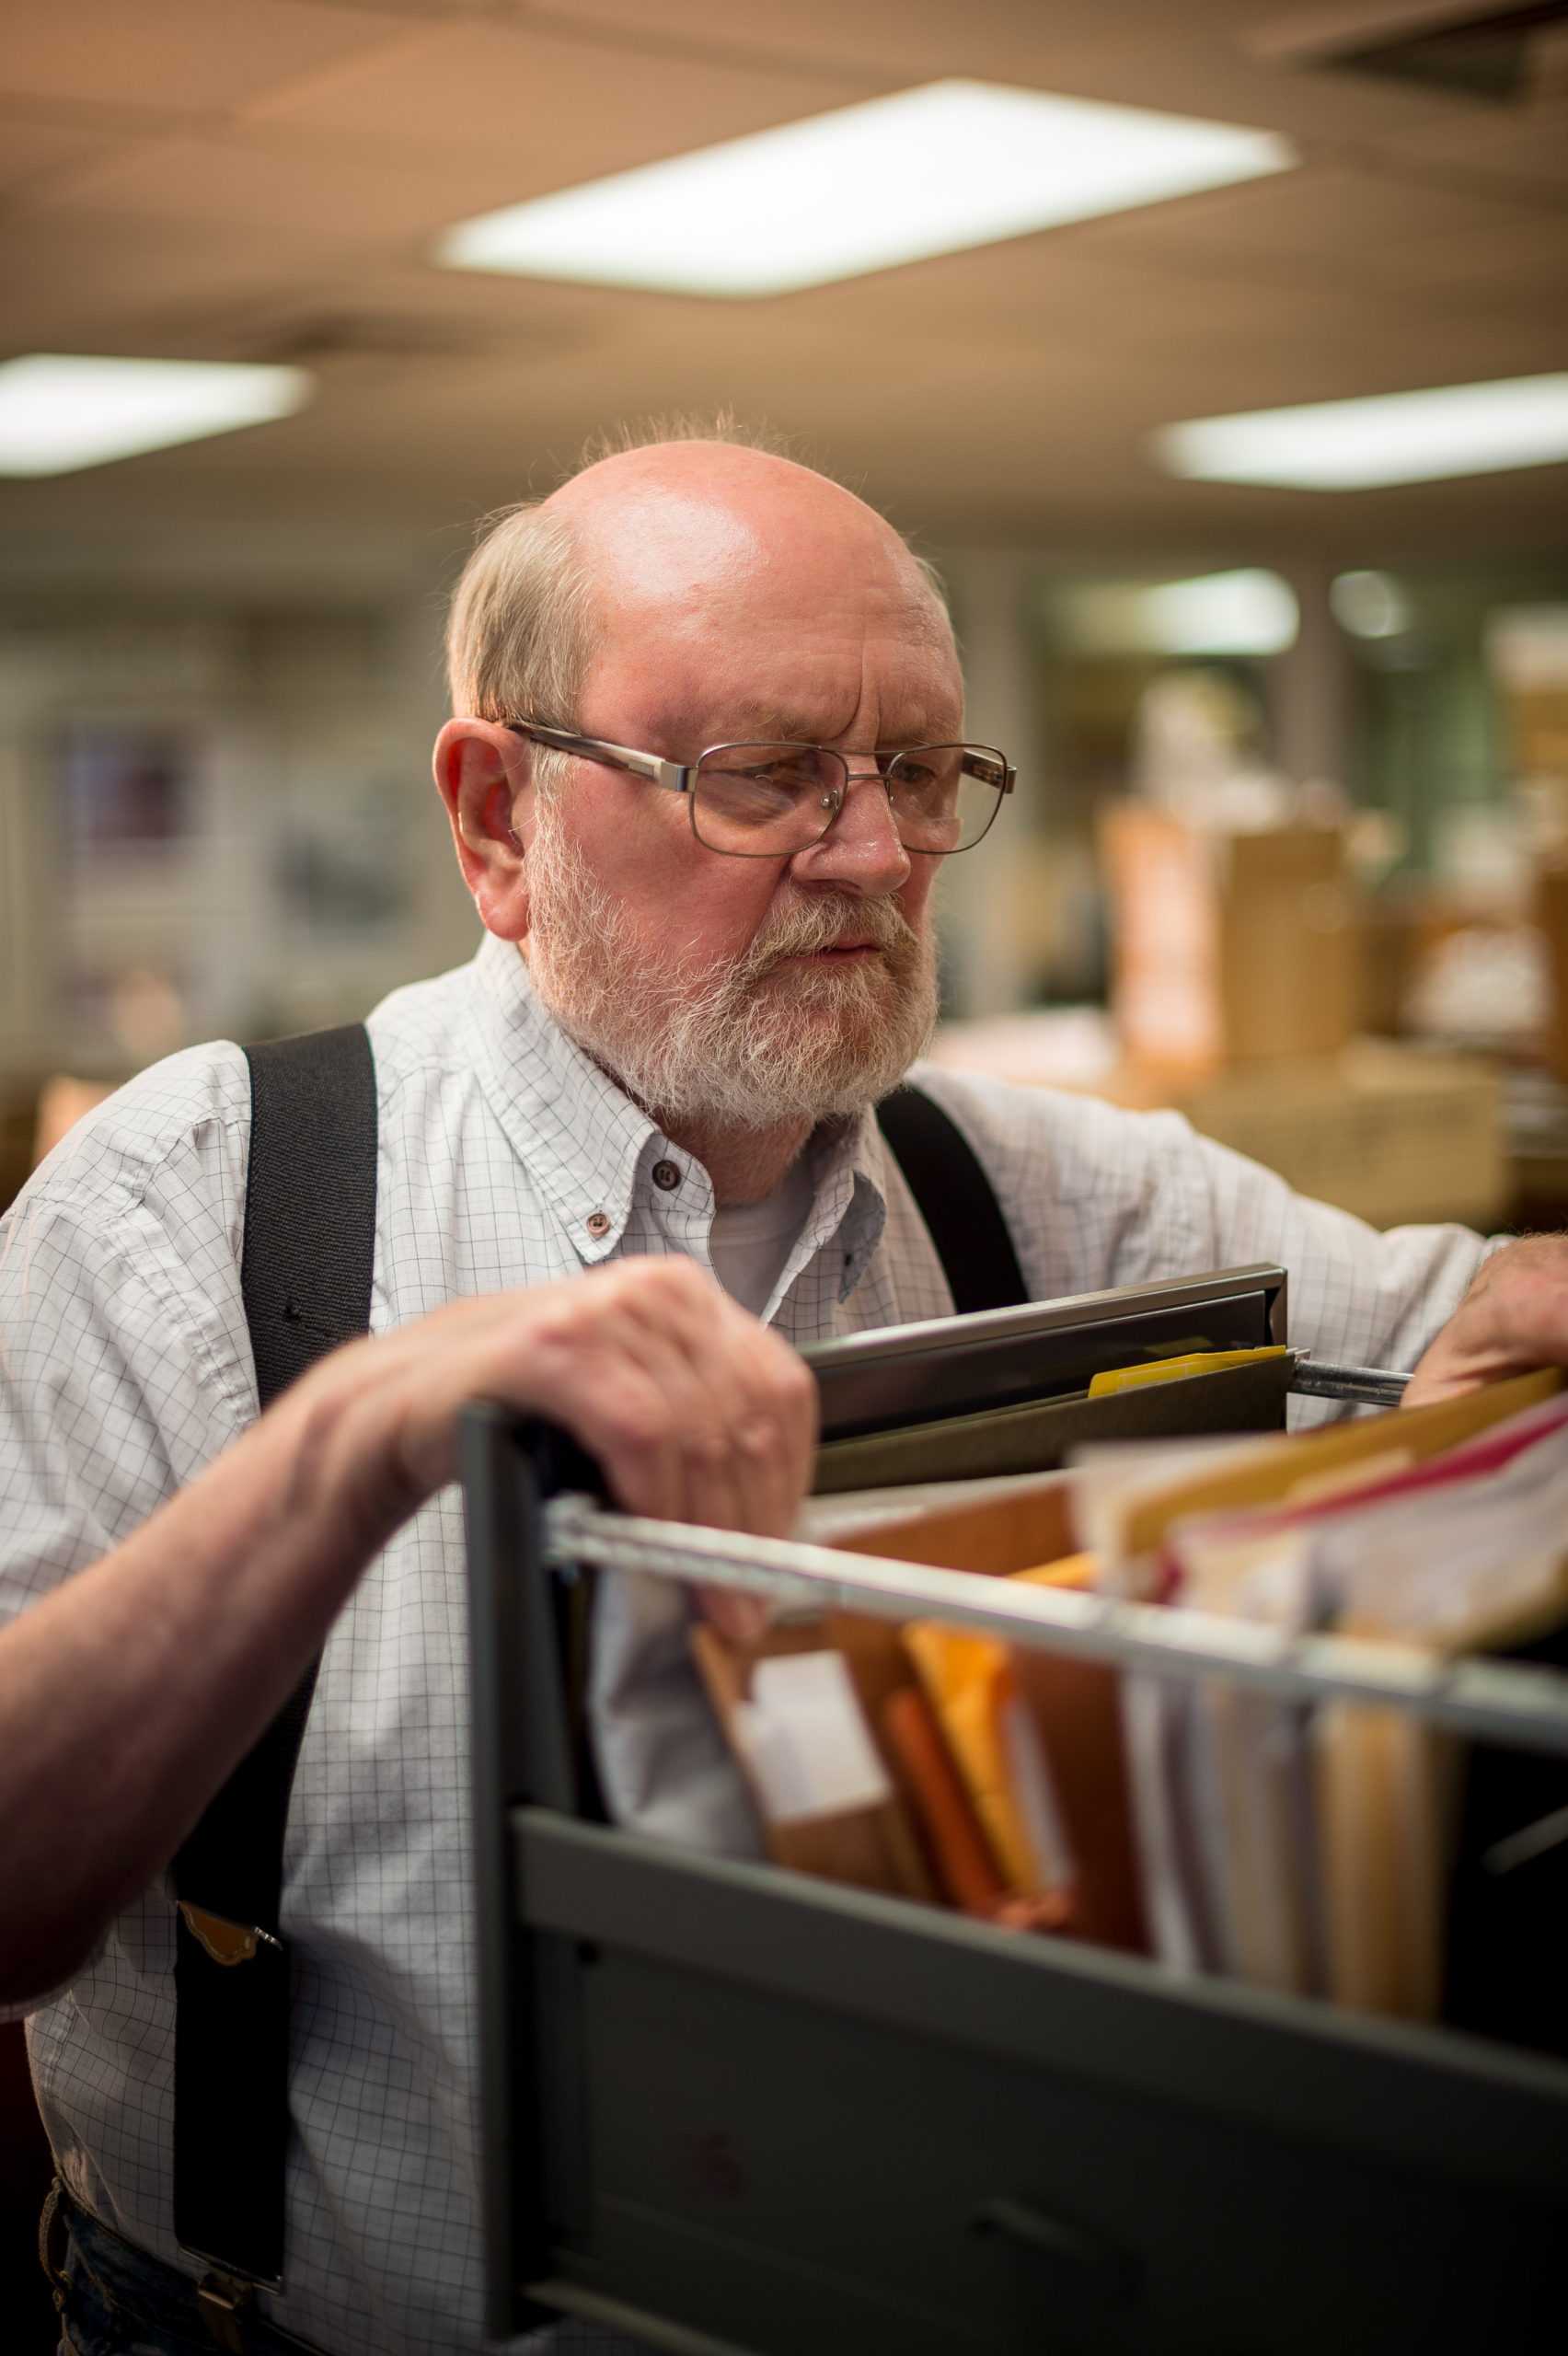 MGCCC archivest Charlie Sullivan looking through files in the archive collection